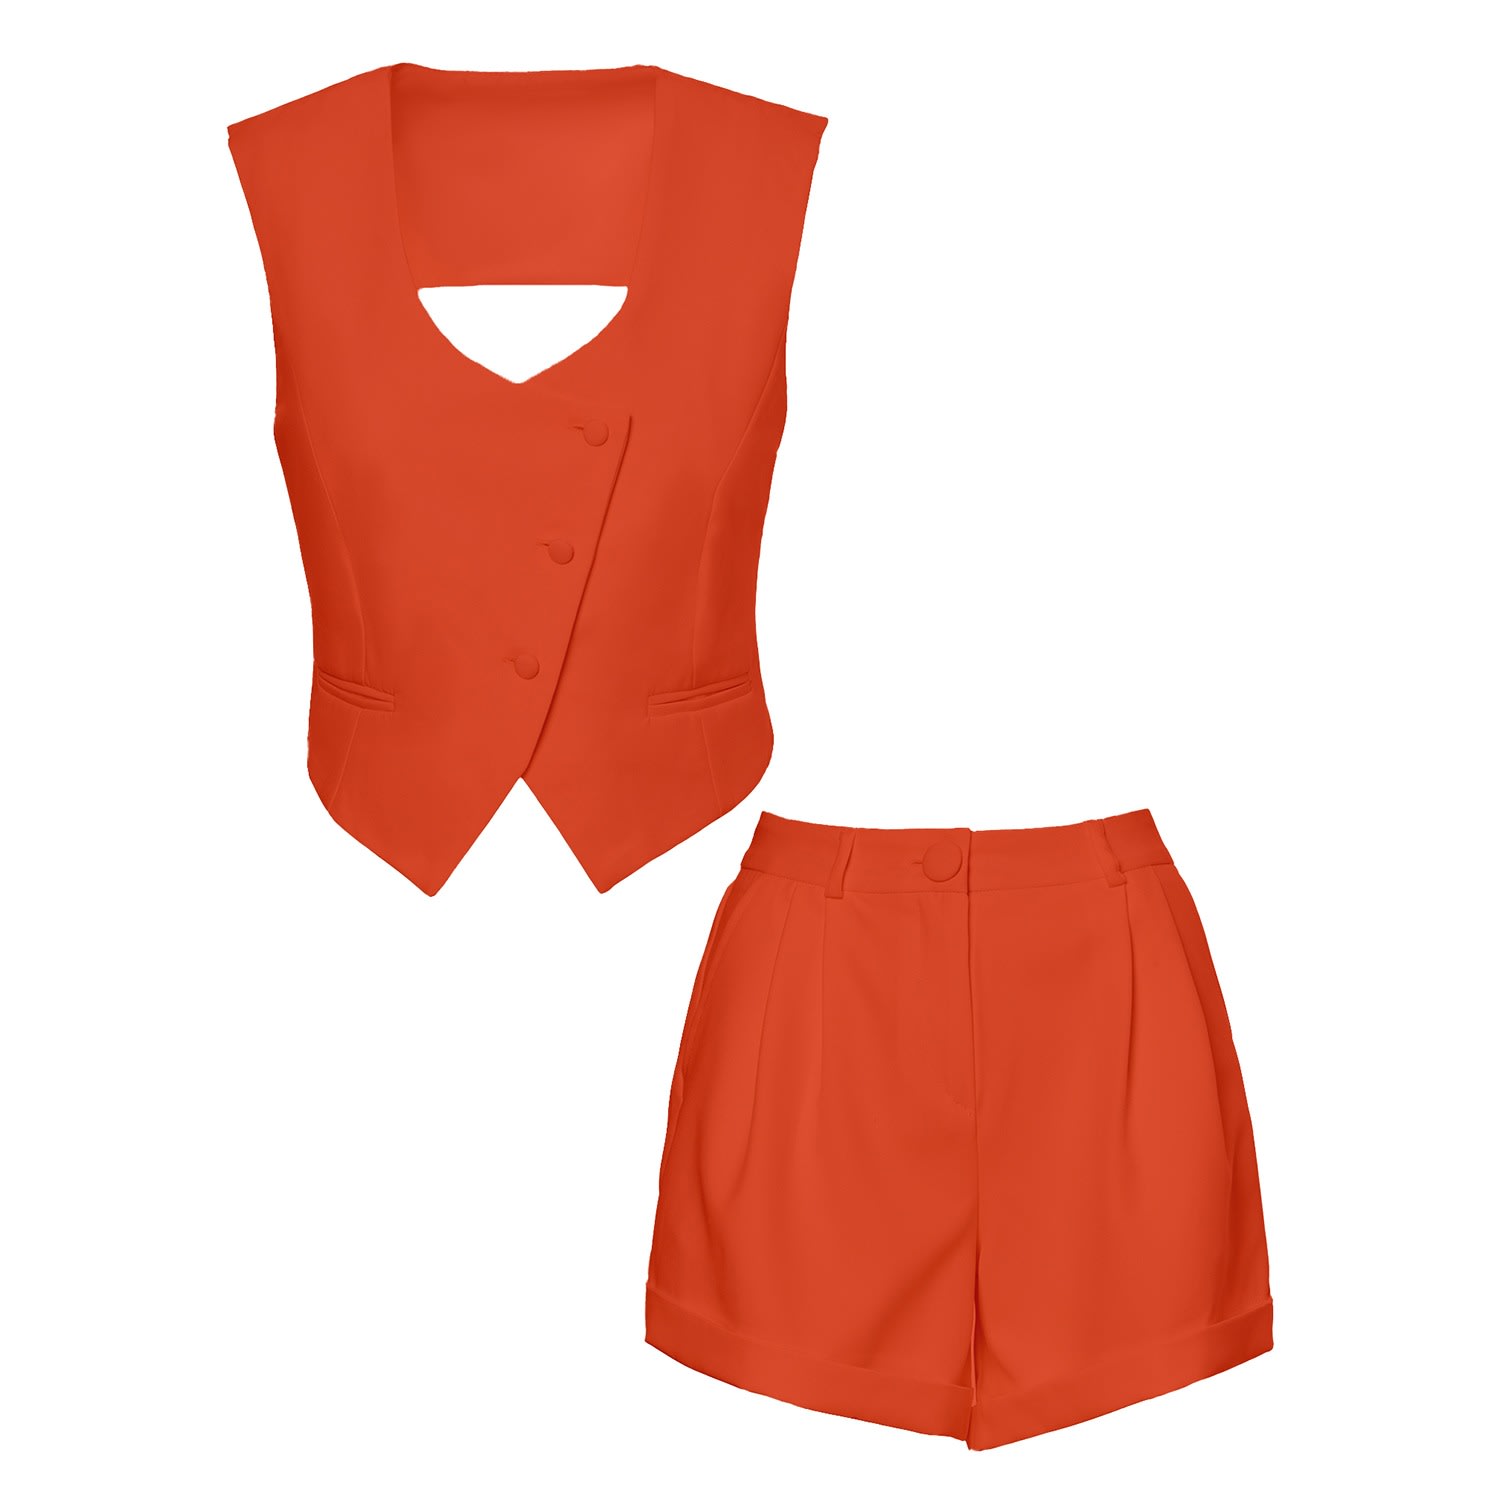 Bluzat Women's Yellow / Orange Orange Suit With Vest And Shorts In Red